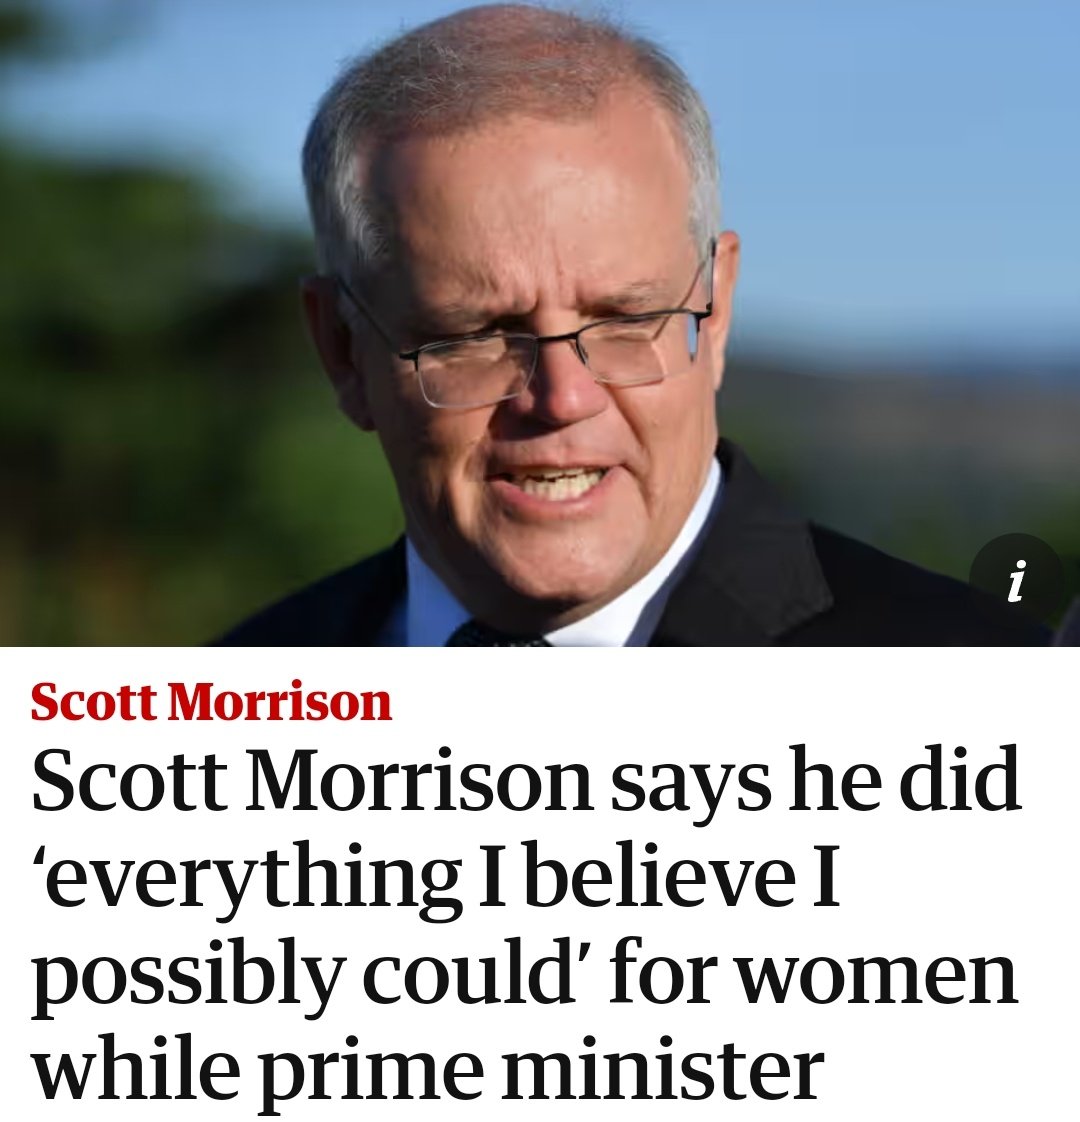 What was a pivotal moment for women's respect as Grace Tame & Brittany Higgins boldly shared their sexual assaults in a landmark #NPC talk, Scott Morrison refused to attend. He even refused to tune in. The smallest act. This is not doing 'everything he could' for women #auspol